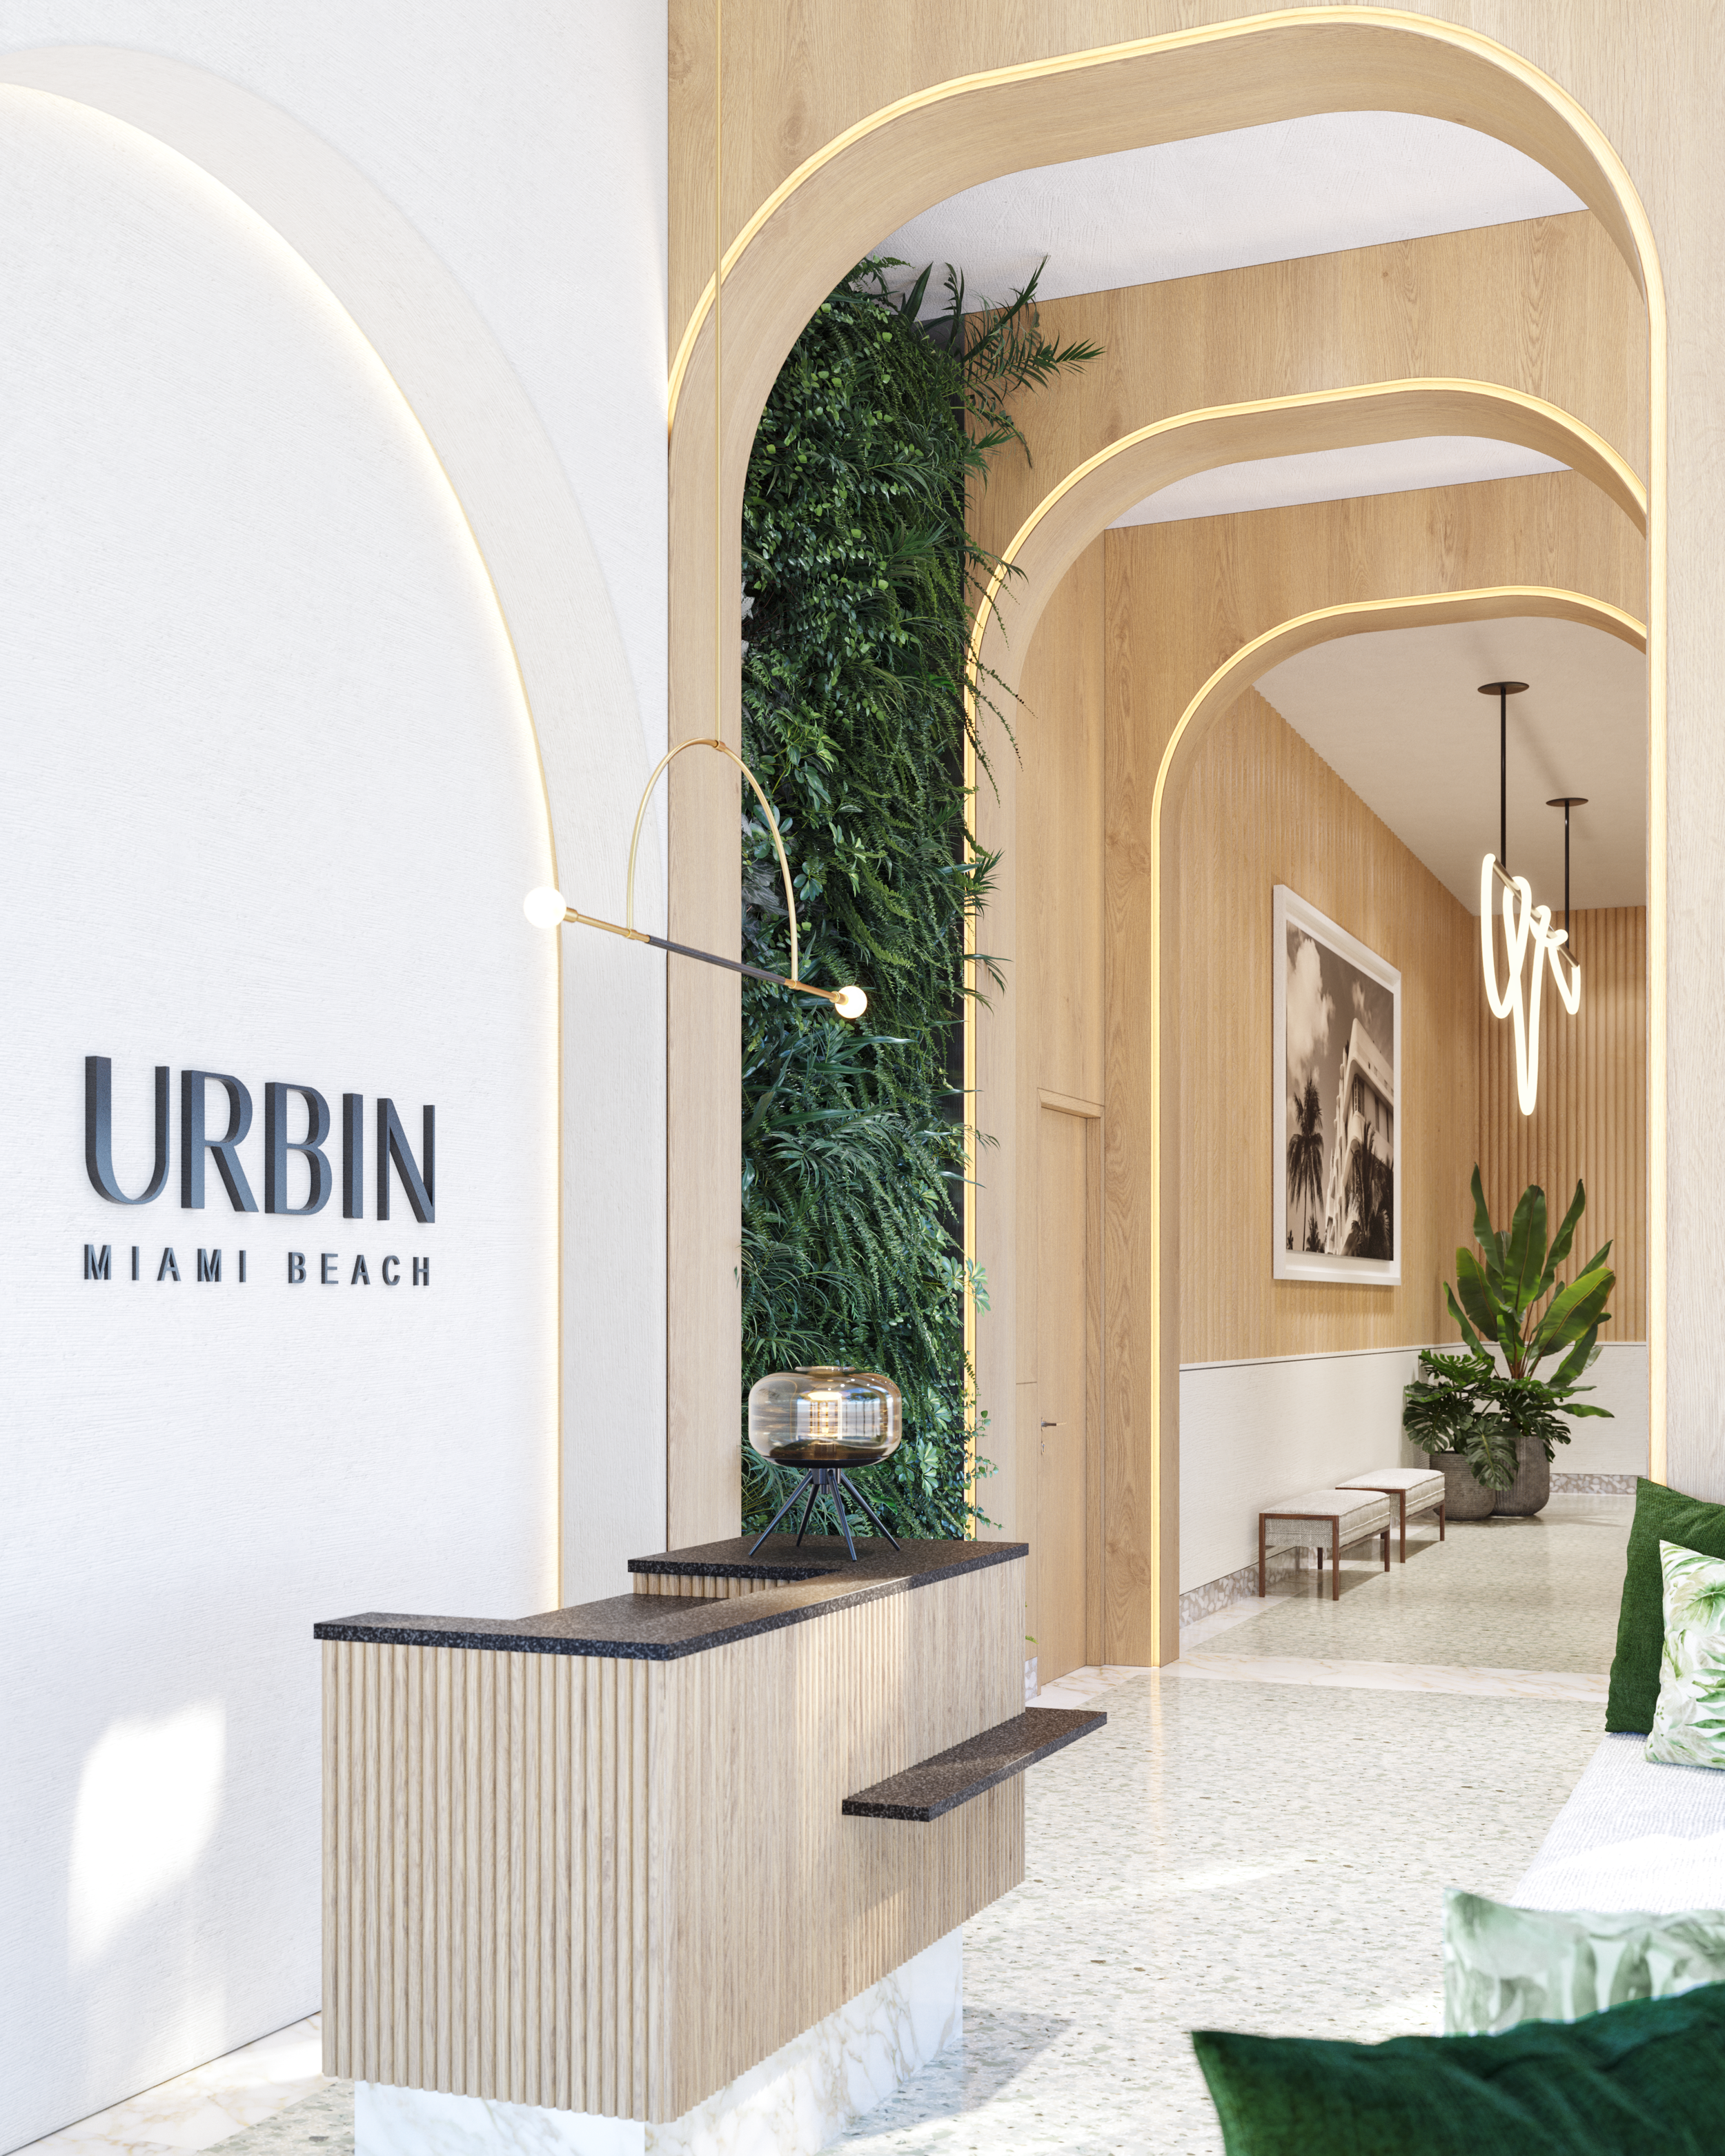 Location Ventures Announces Sellout of URBIN Miami Beach Mixed-Use Condo, Co-Working Lifestyle Project4.png